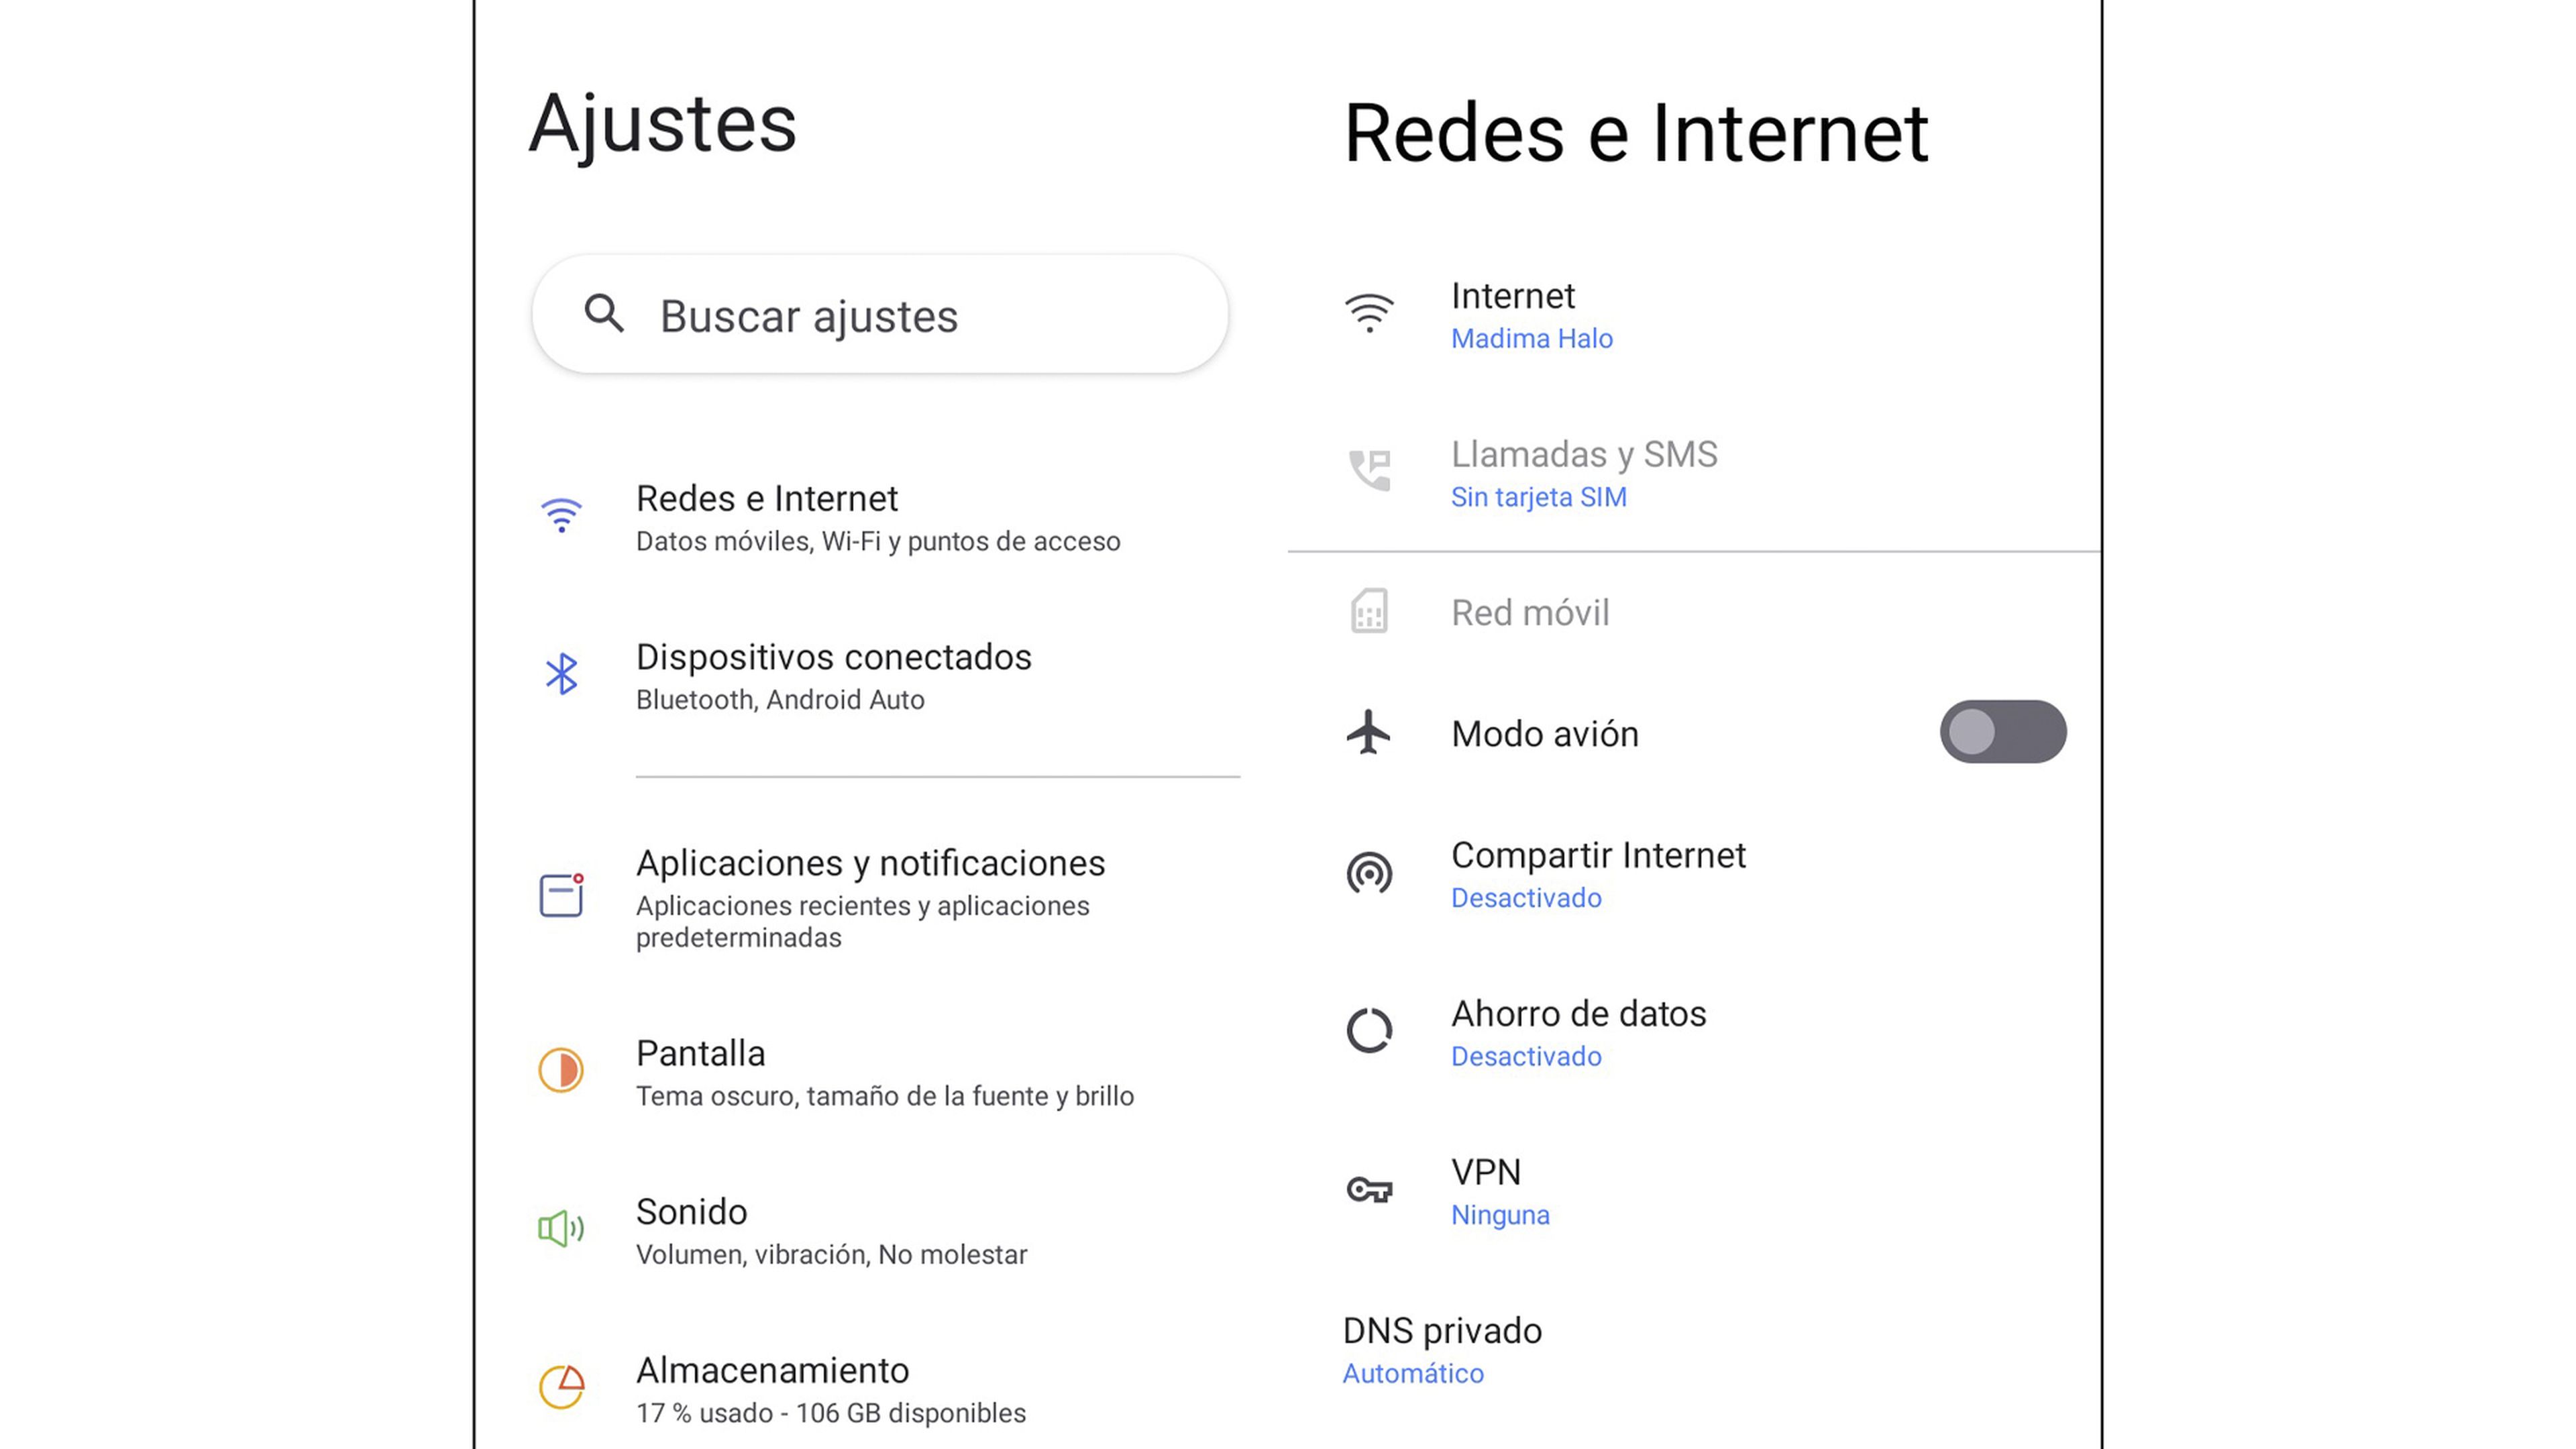 Redes e Internet Android